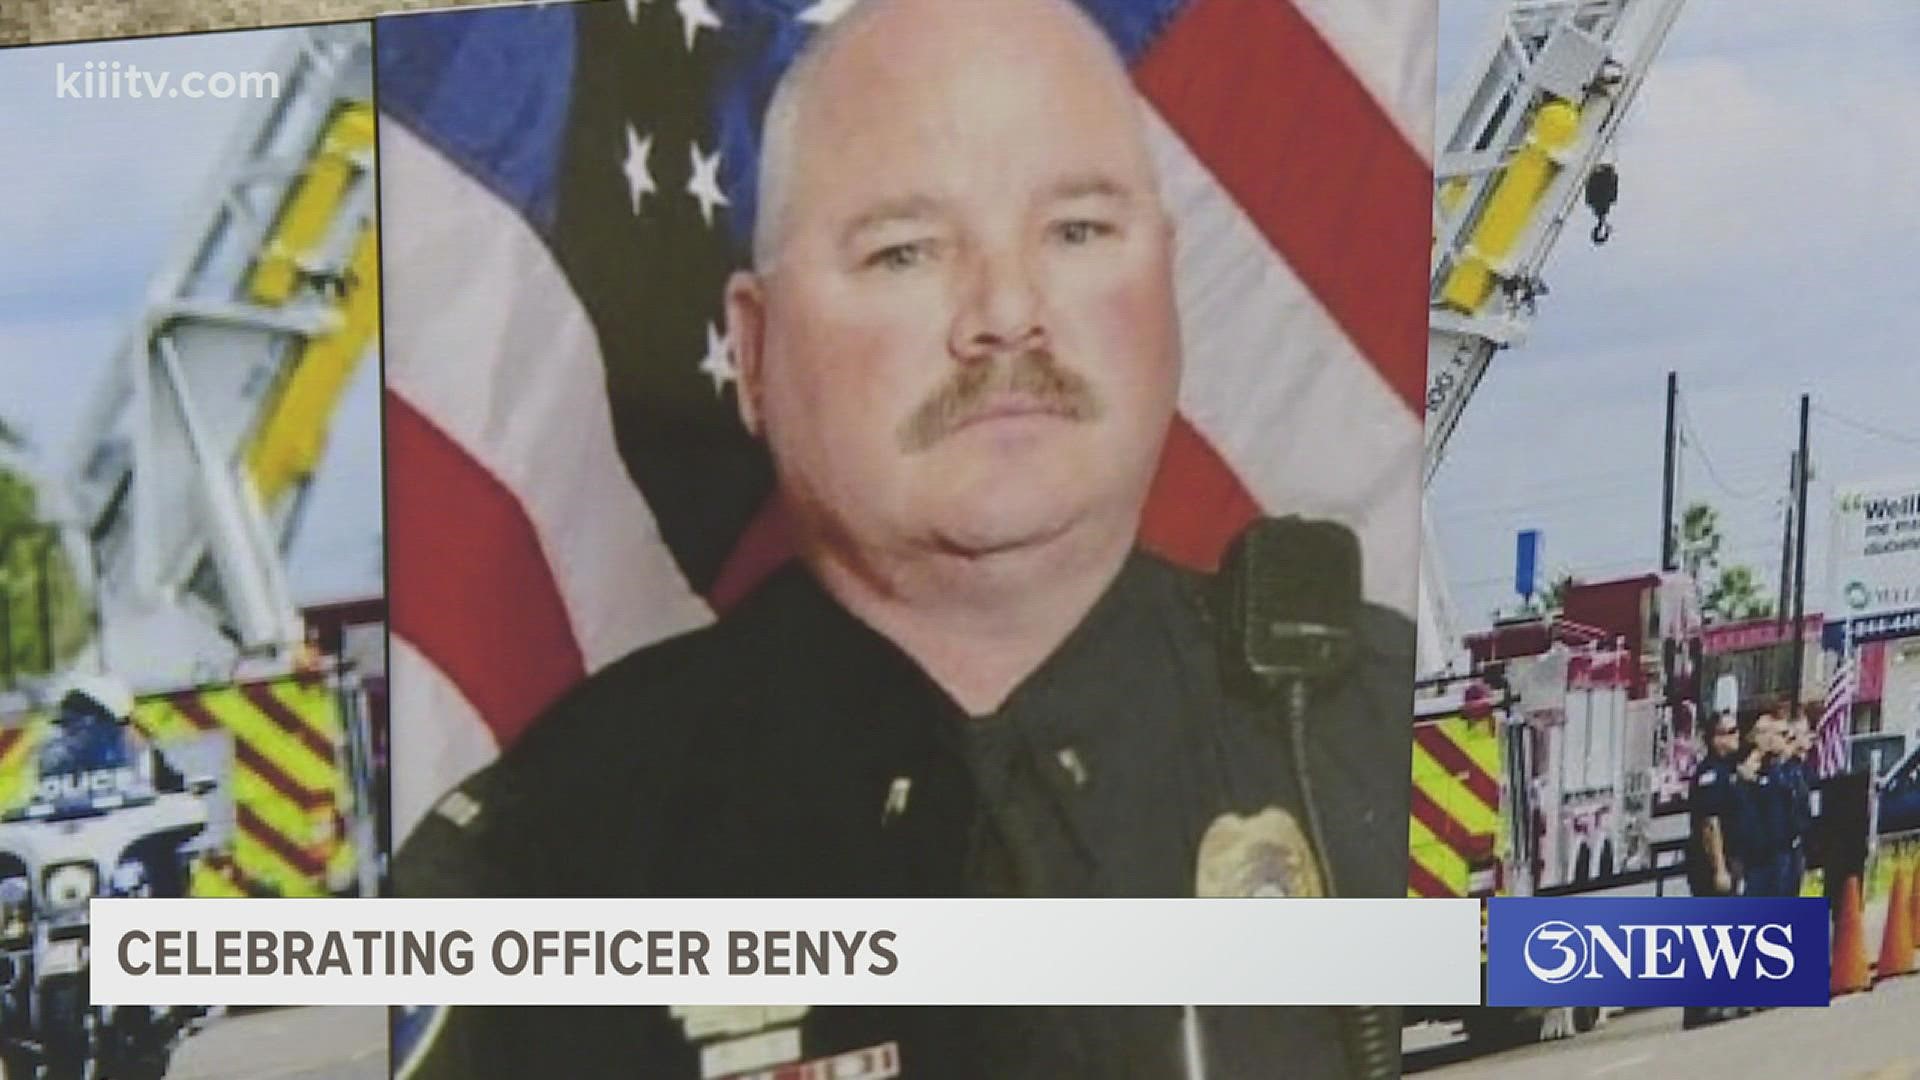 The money collected from the event will go directly to Sherman Benys' family.